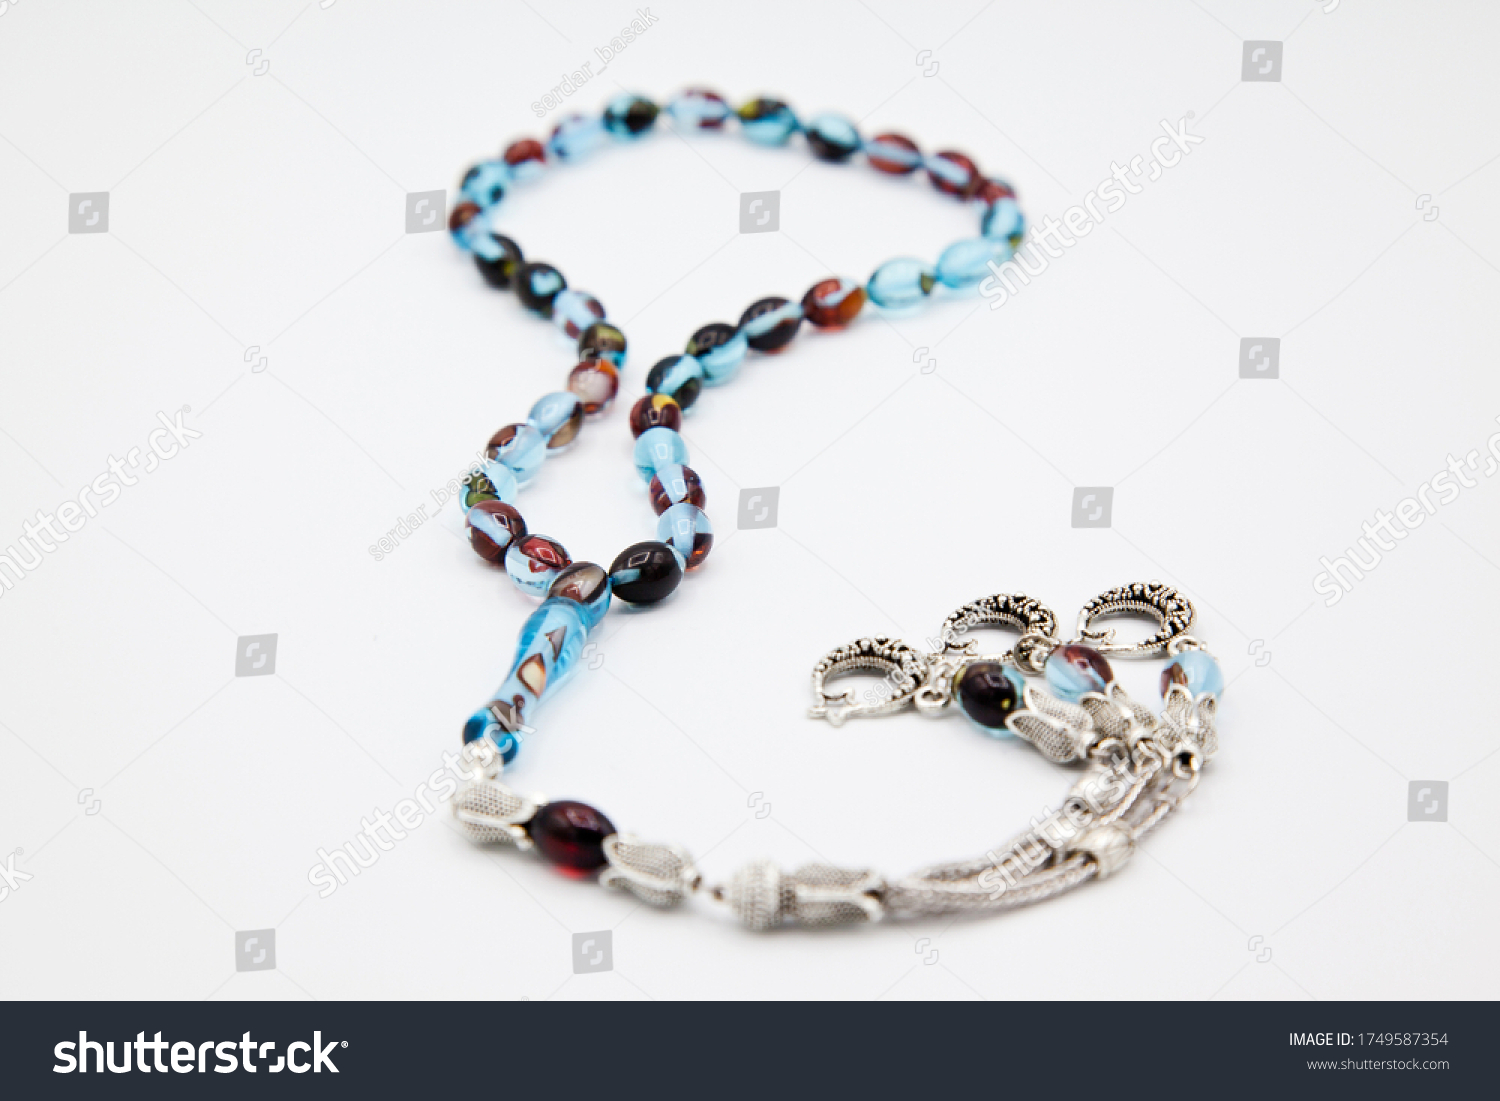 14,006 Colorful Rosary Images, Stock Photos & Vectors | Shutterstock